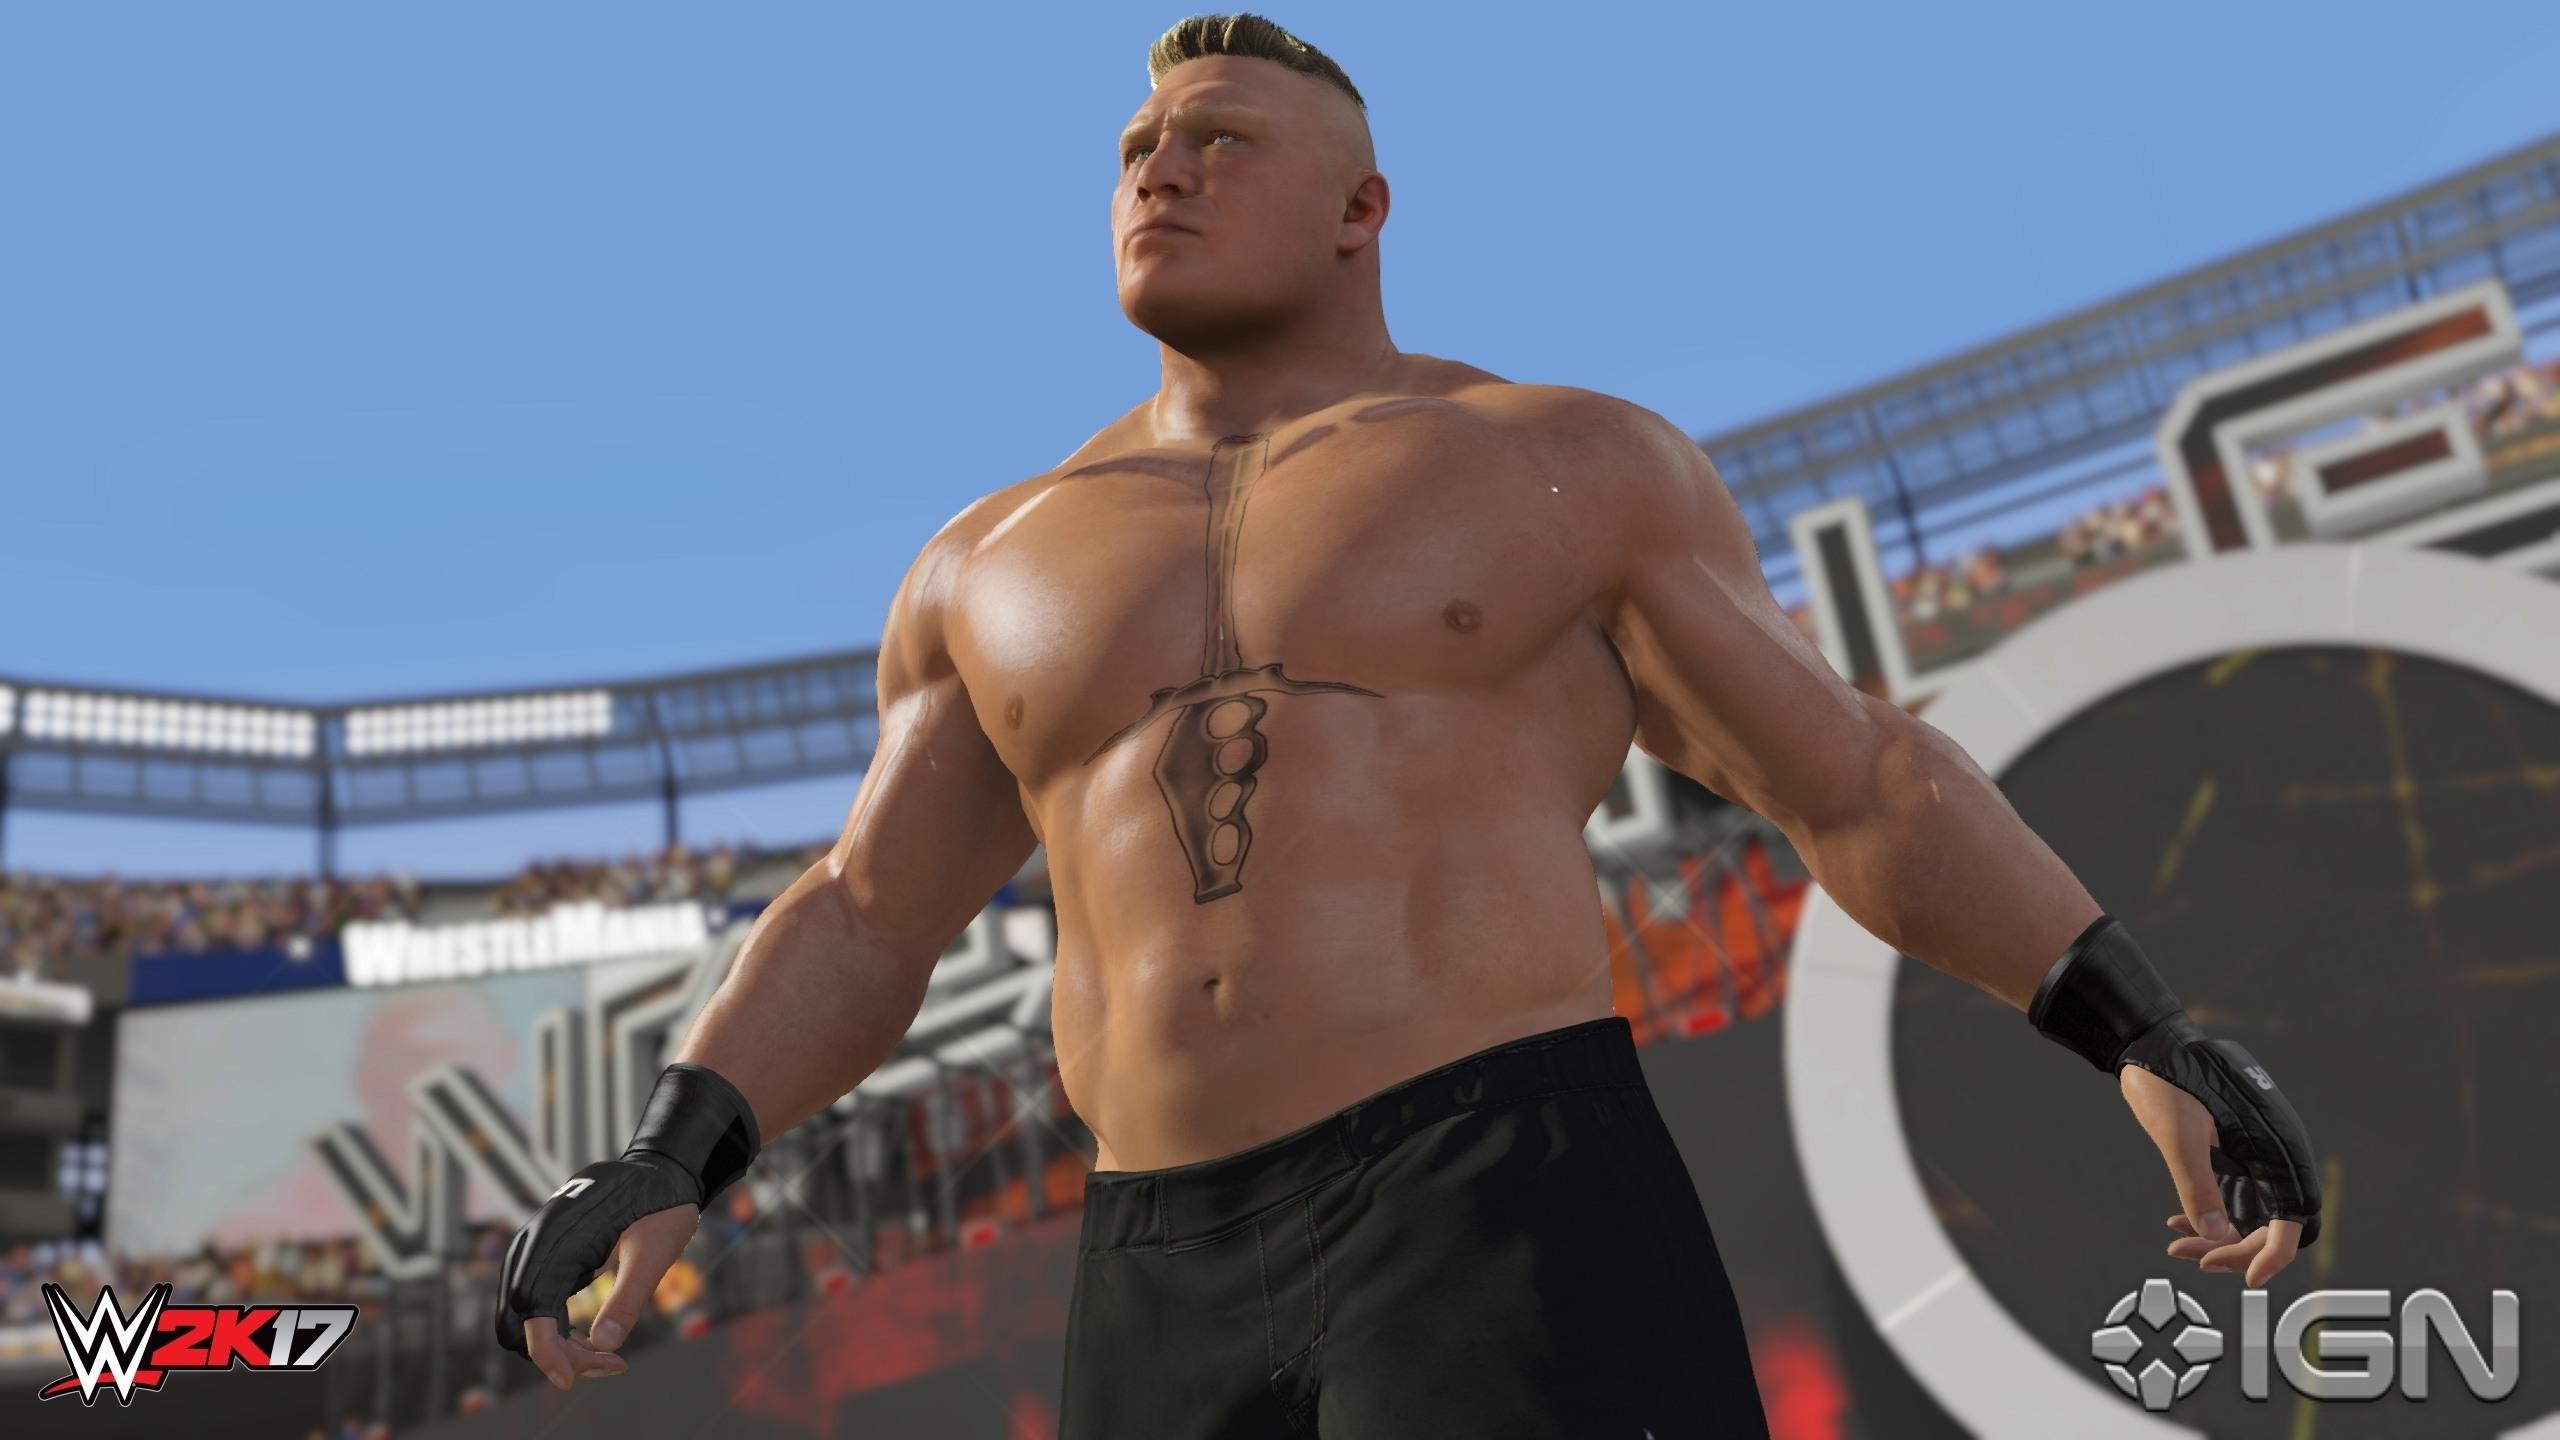 2560x1440 The newest citizens of Suplex City in WWE 2K17. Brock Lesnar ...